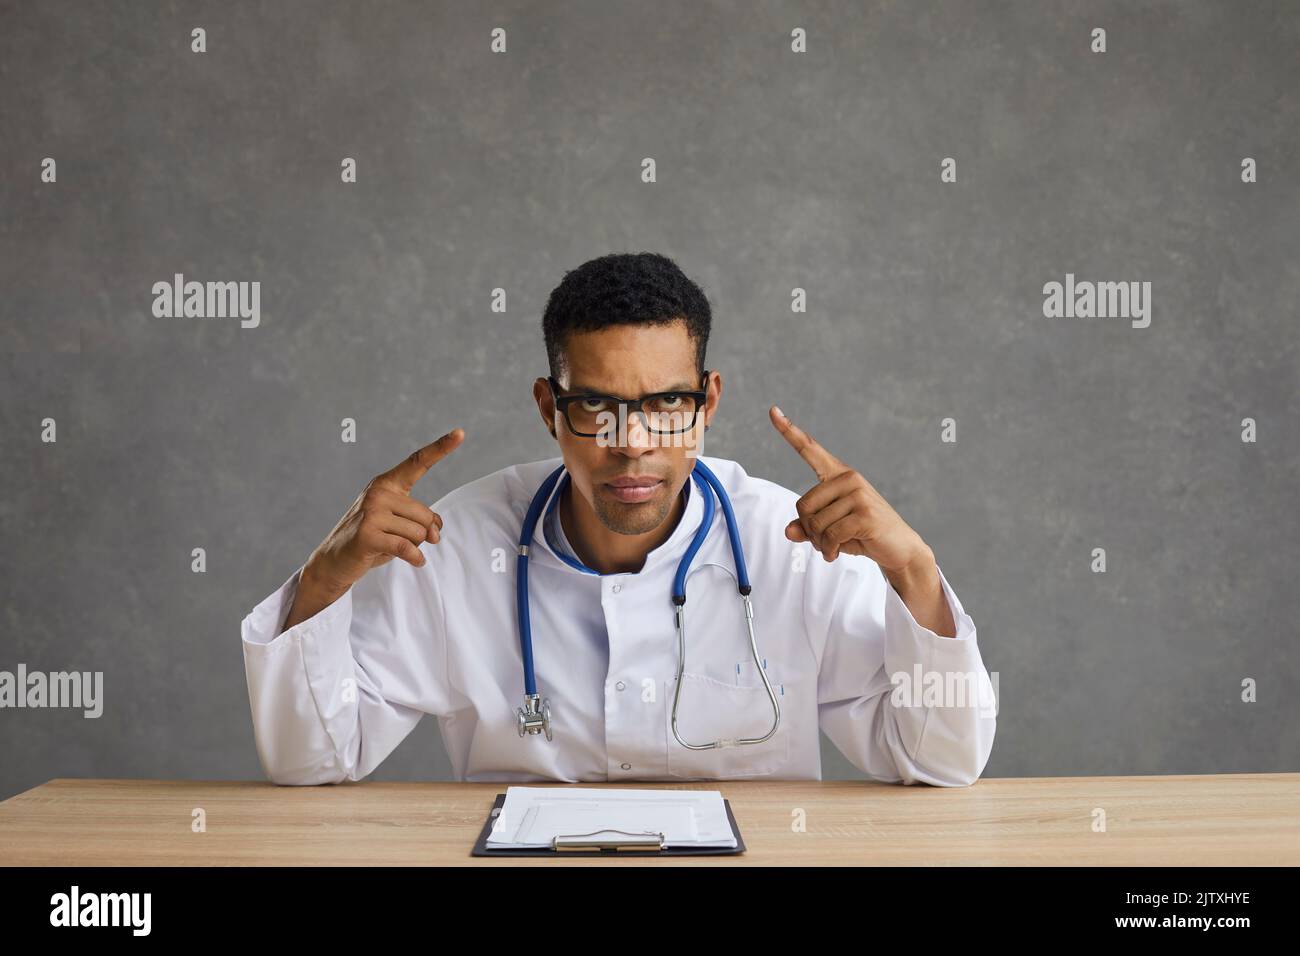 Angry American American man shows himself hinting that he is experiencing headaches and fatigue. Stock Photo